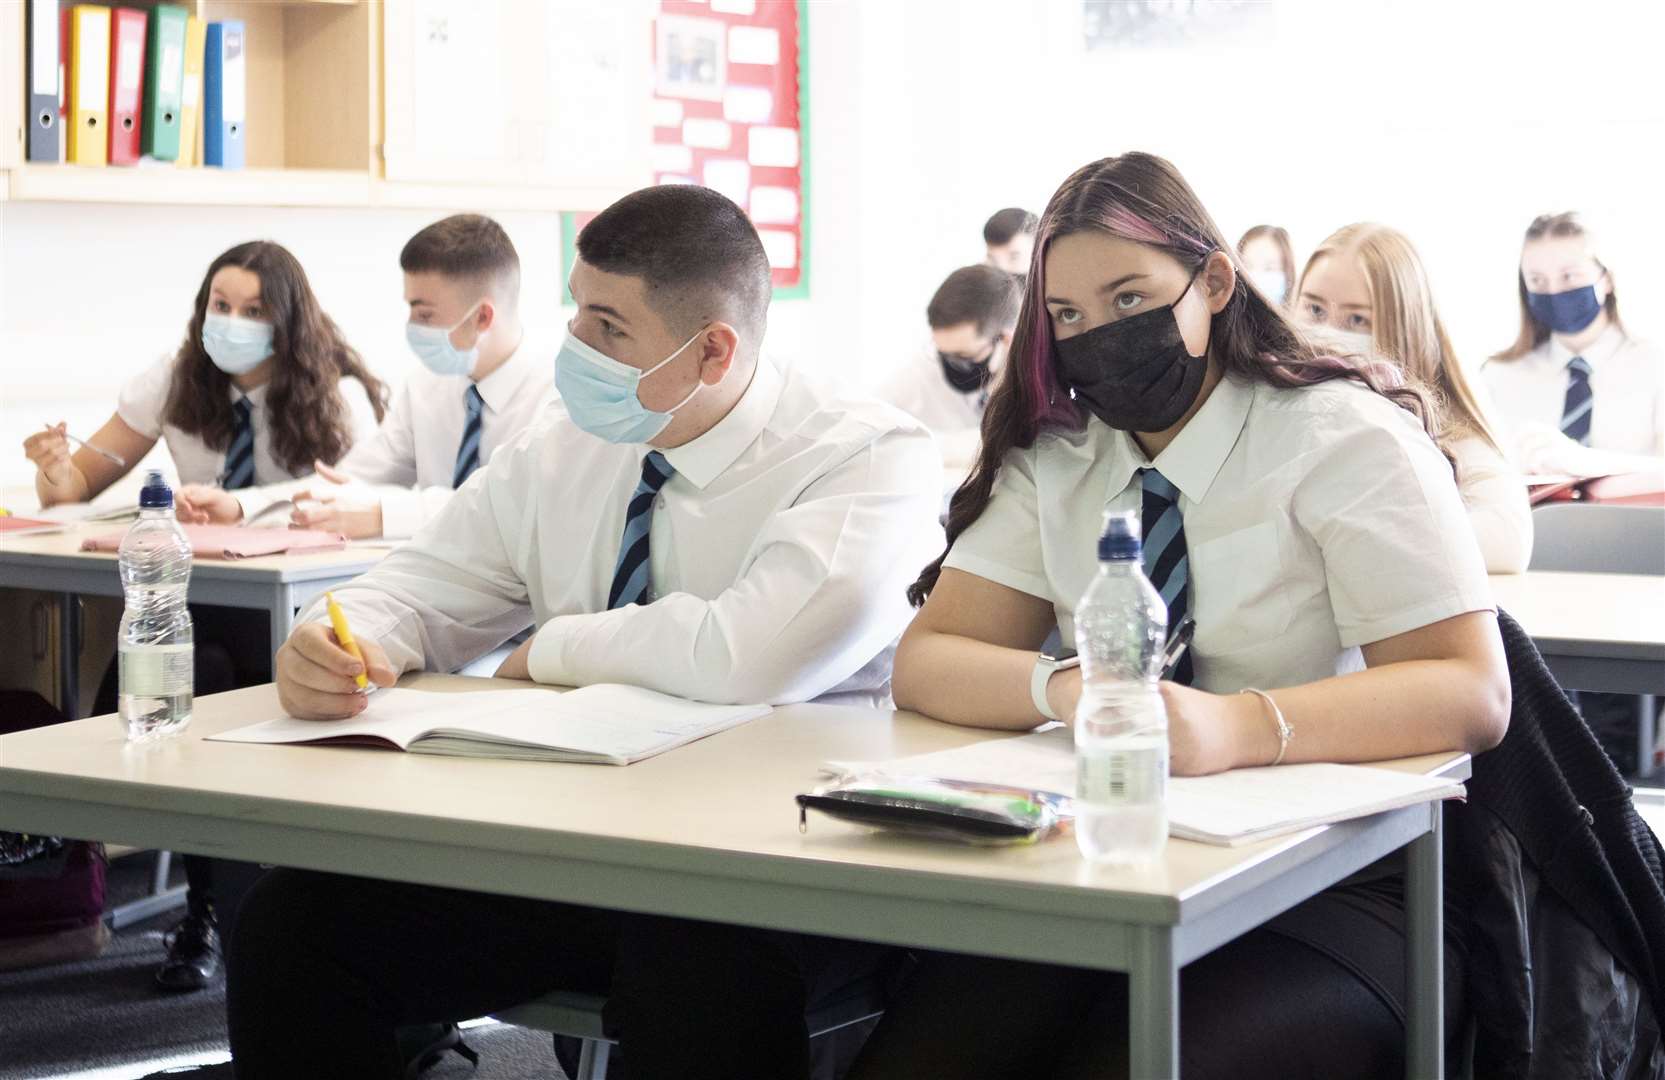 Masks in school classrooms were scrapped on Thursday (Jane Barlow/PA)